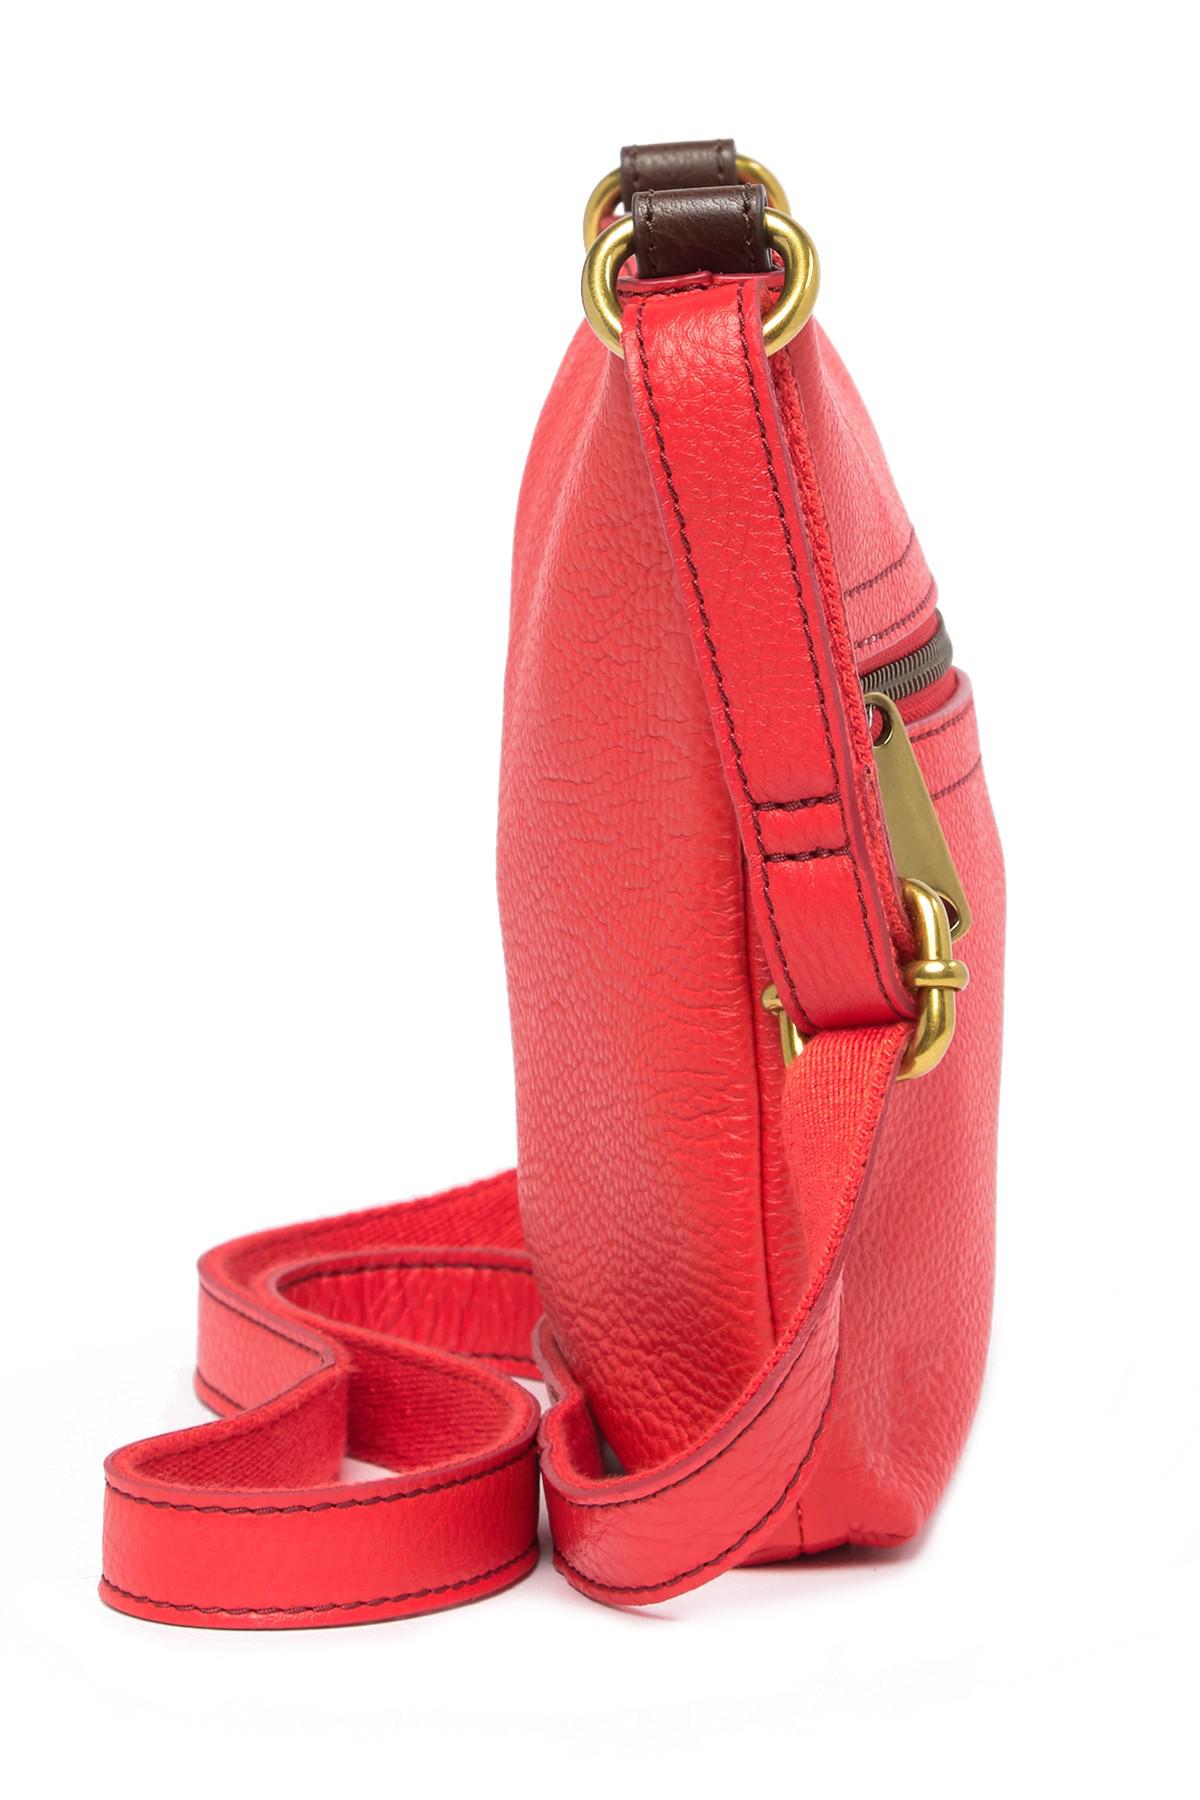 Fossil Explorer Mini Leather Crossbody Bag in Red - Lyst